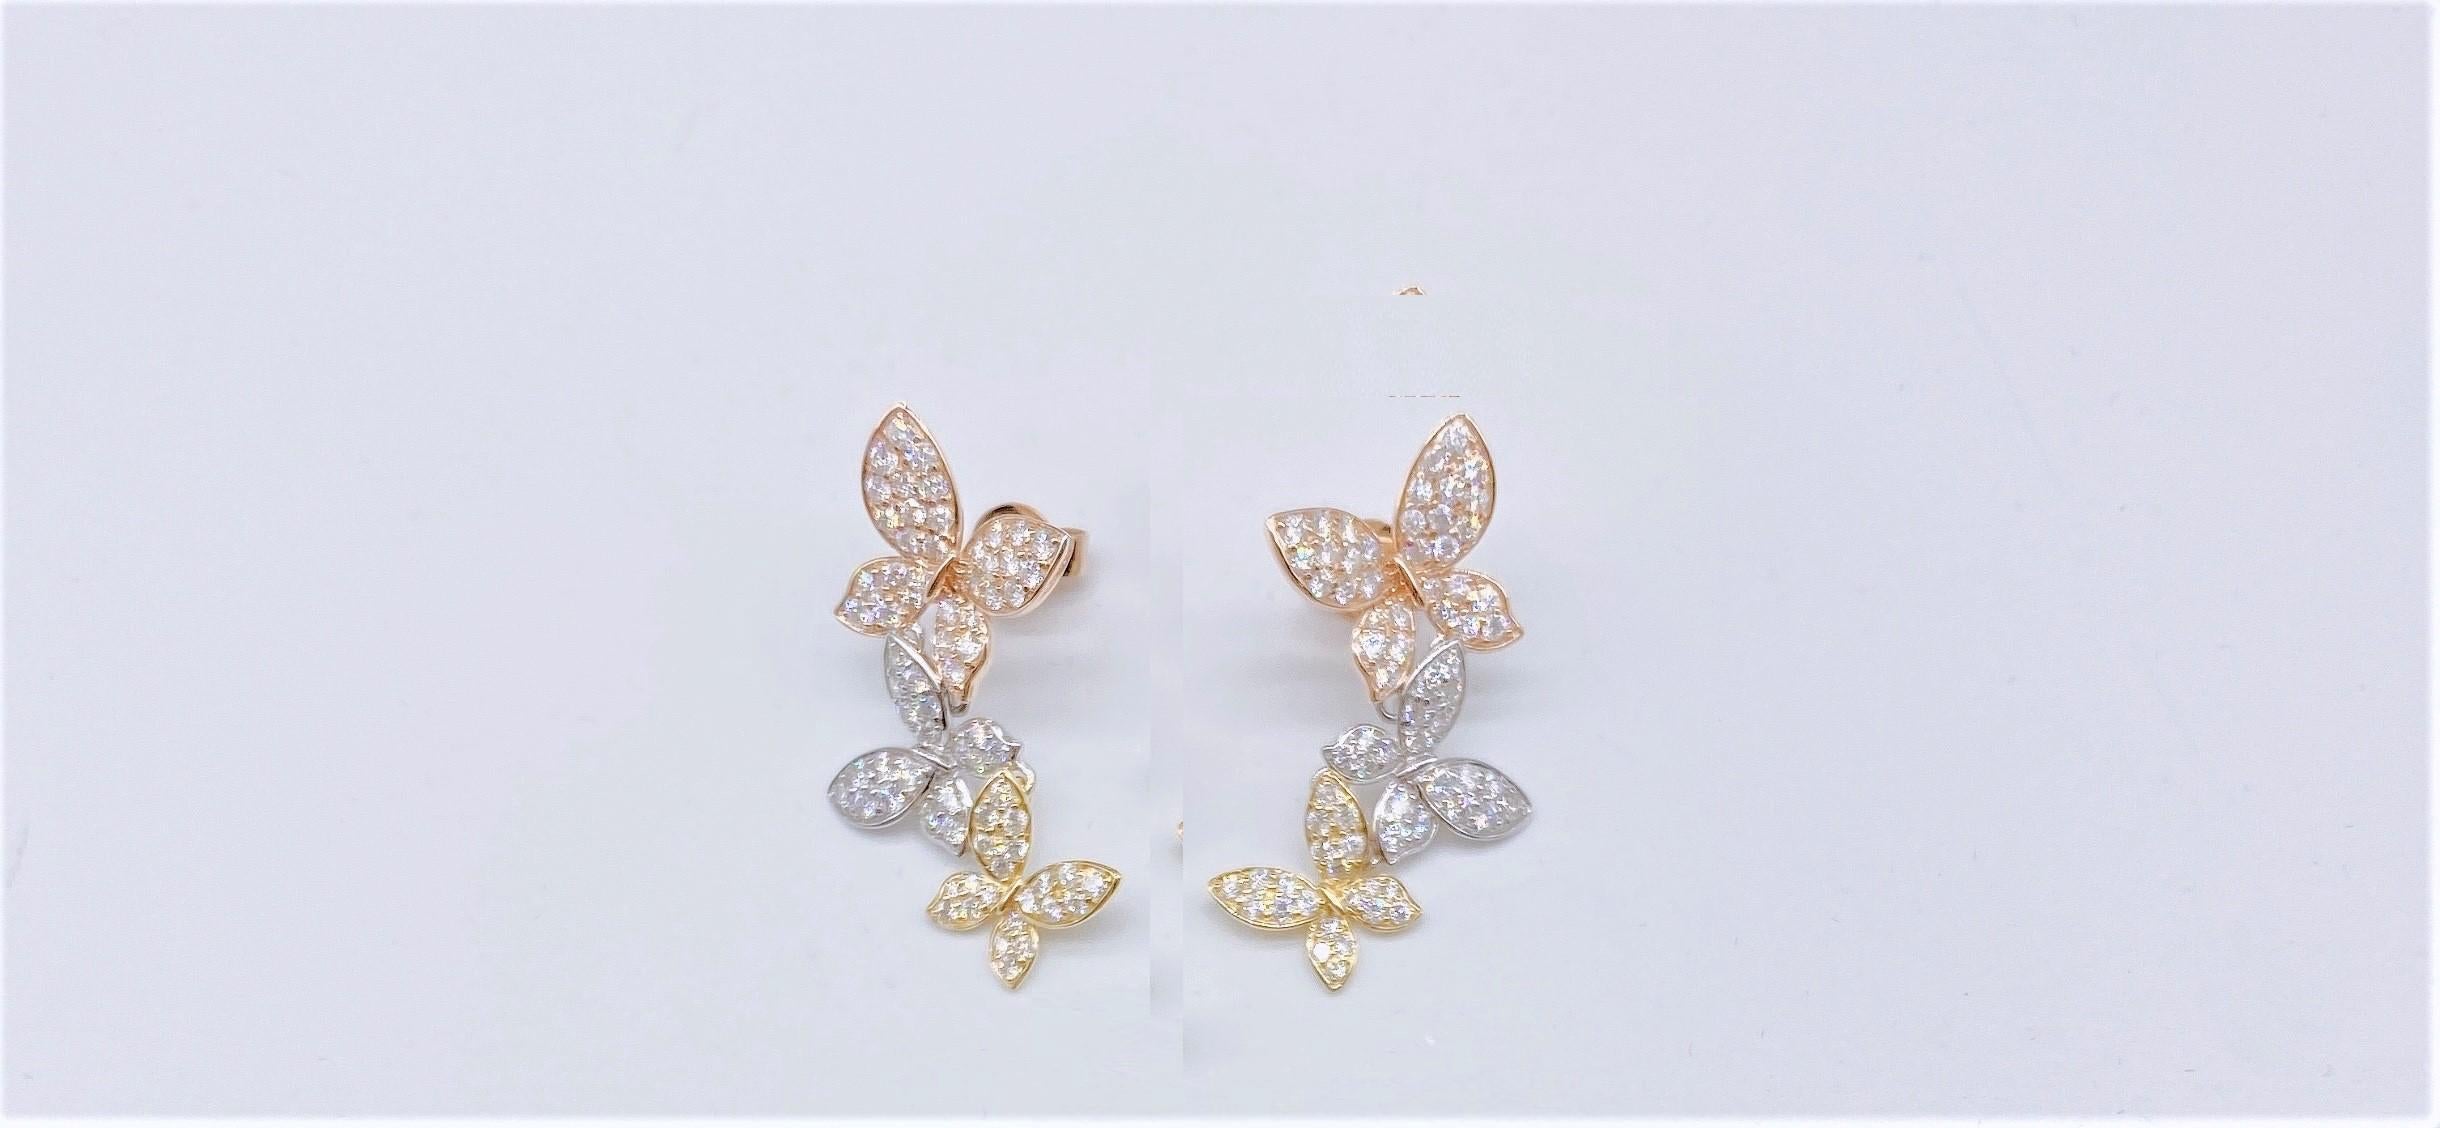 The Following Items we are offering is a Rare Important Radiant 18KT Yellow Gold and 18KT Tri Color Gold Gorgeous Butterfly Diamond Earrings. Earrings Feature Gorgeous Glittering Round Diamonds, all set in Yellow, Rose, and White 18KT Gold!! A Work